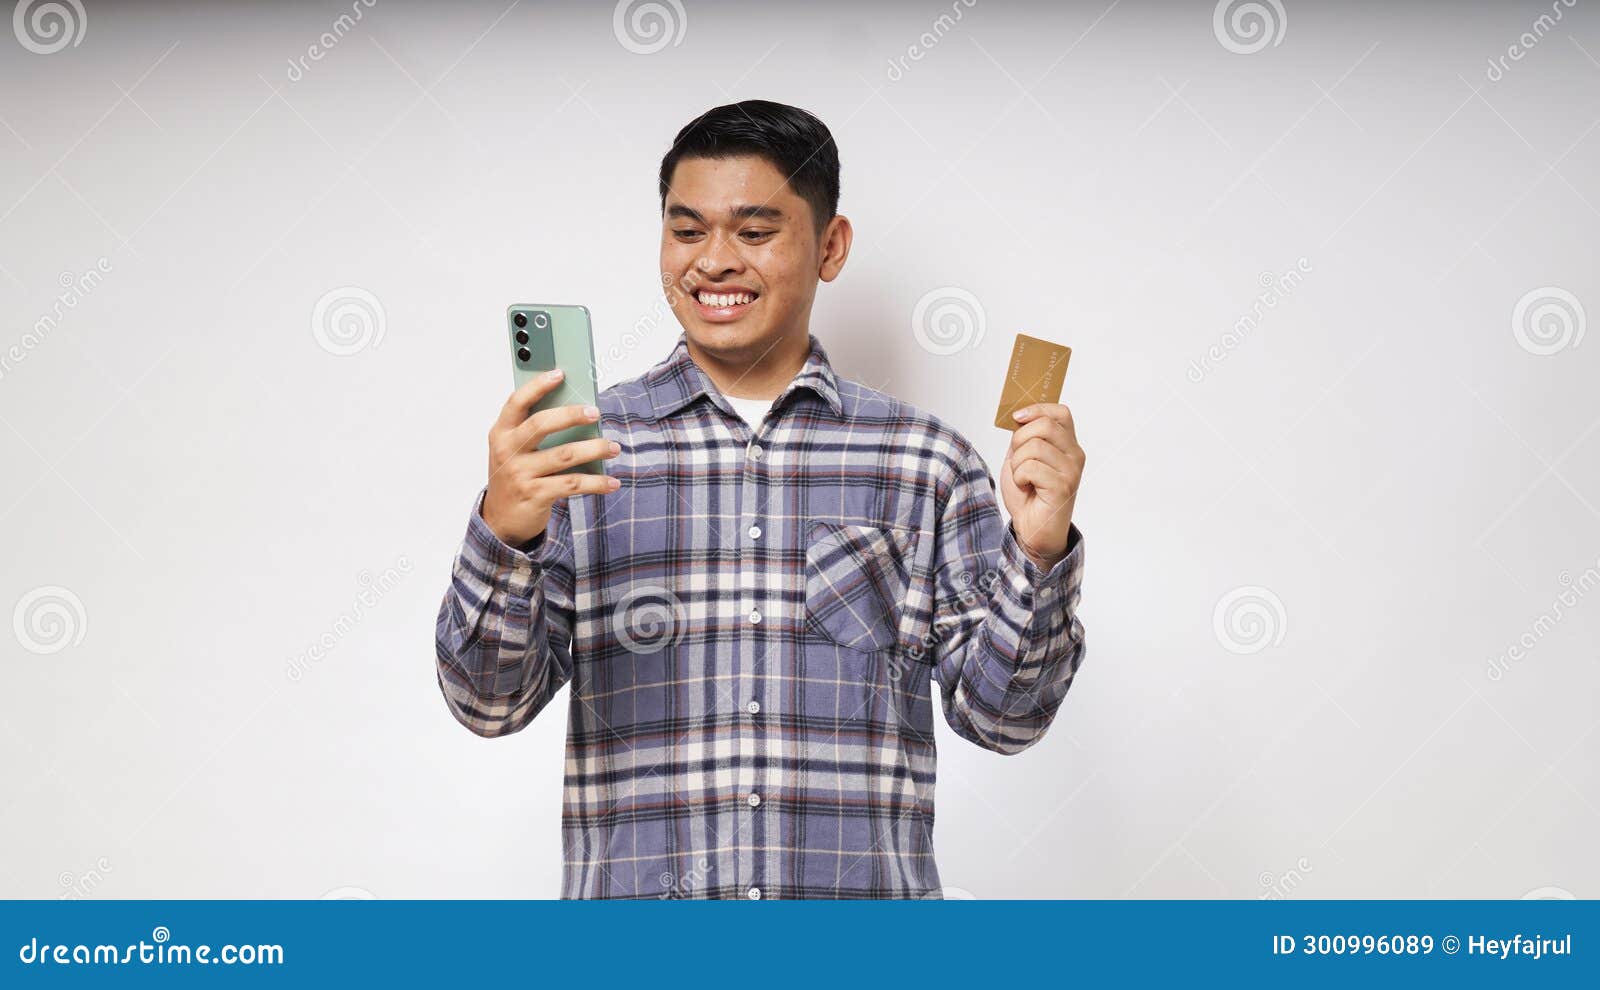 portrait of satisfied happy asian young man holding smart phone and credit card